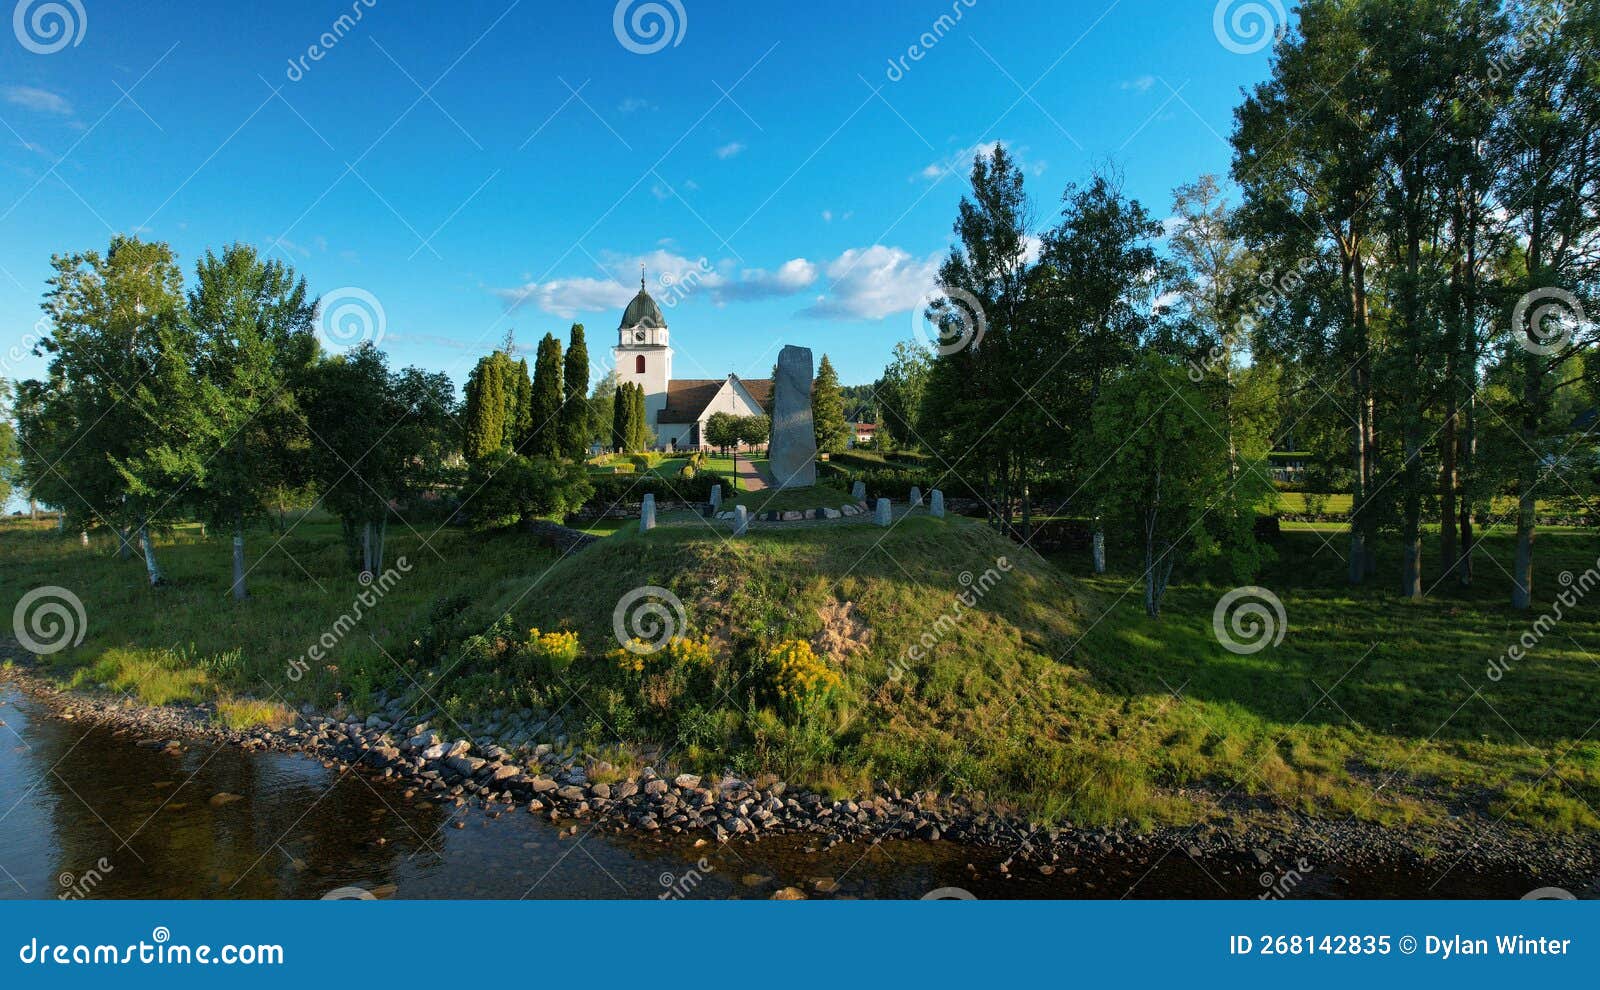 church and the vasa monument in rattvik sweden by the lakeside of siljan lake